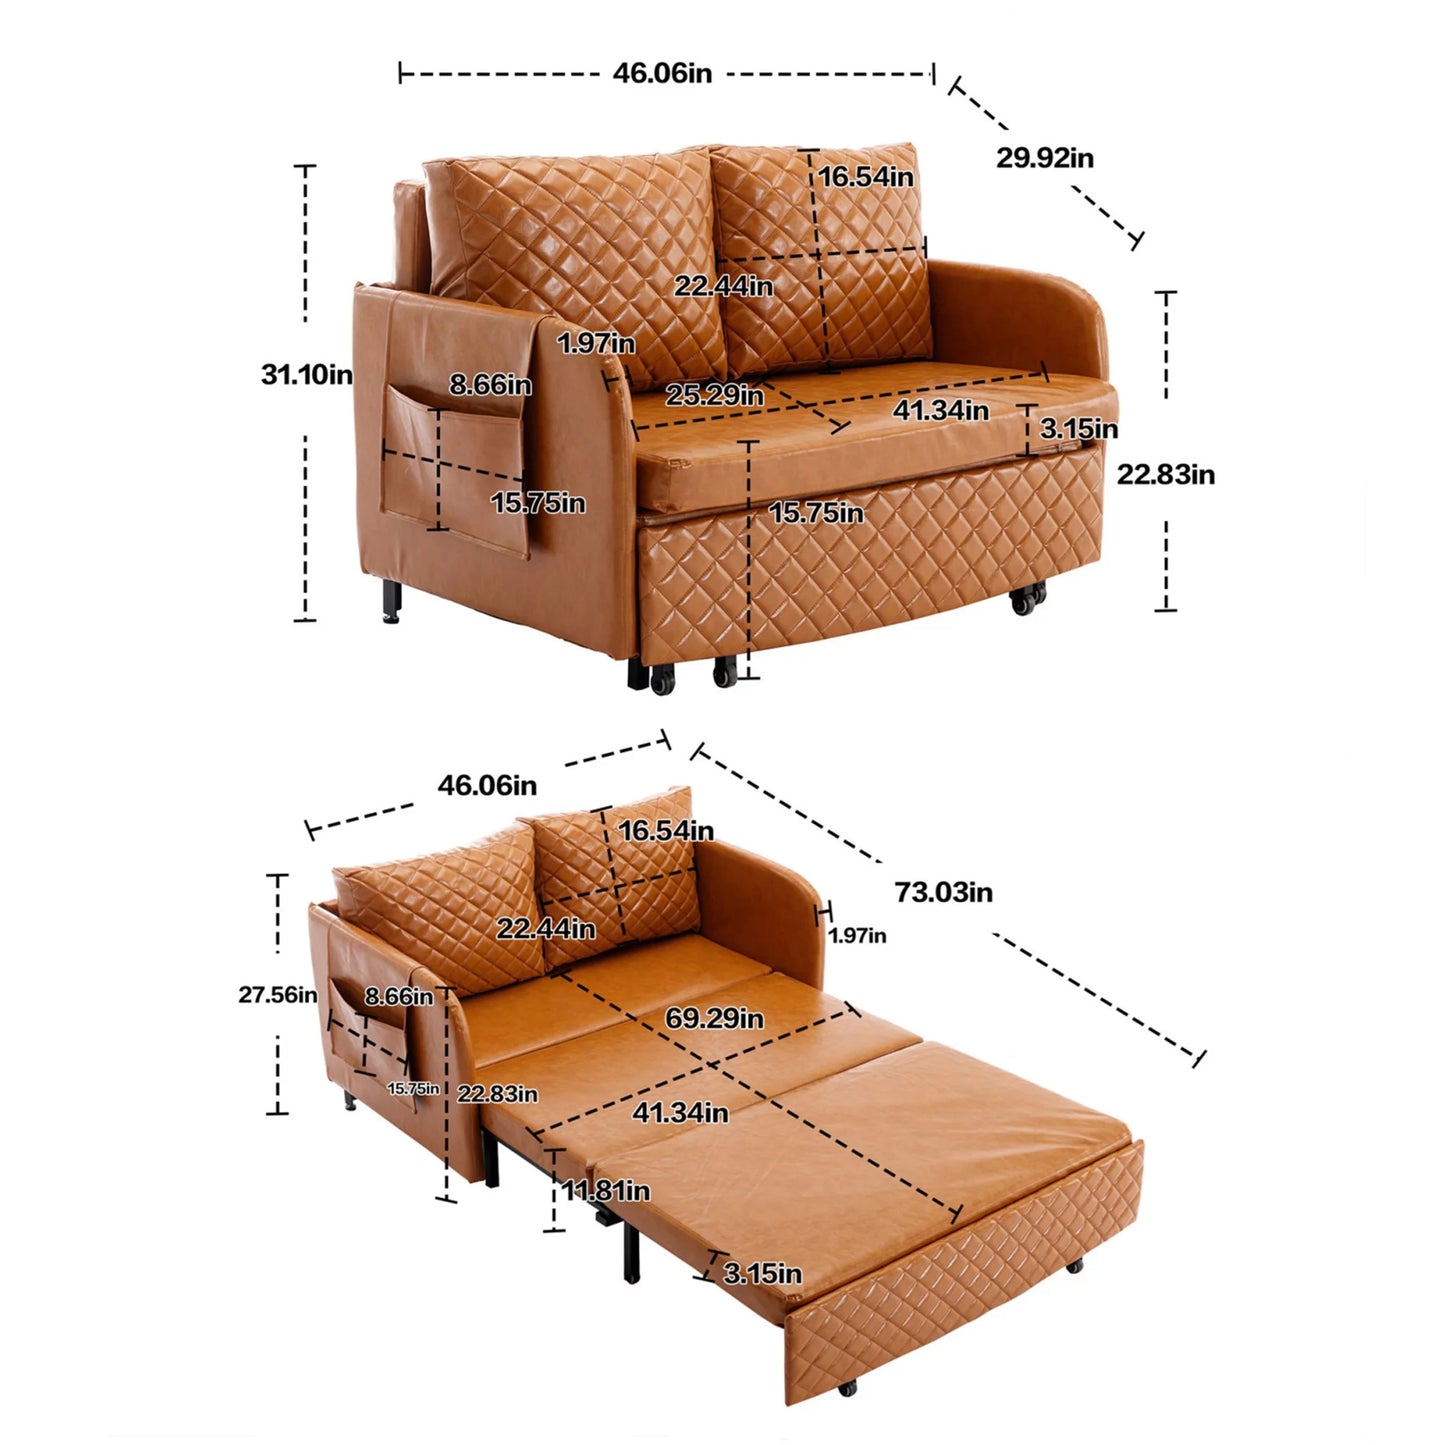 Aukfa Pull Out Sofa Bed, Convertible Sleeper Sofa Futon Sofa Bed for Home Office, Leather, Brown